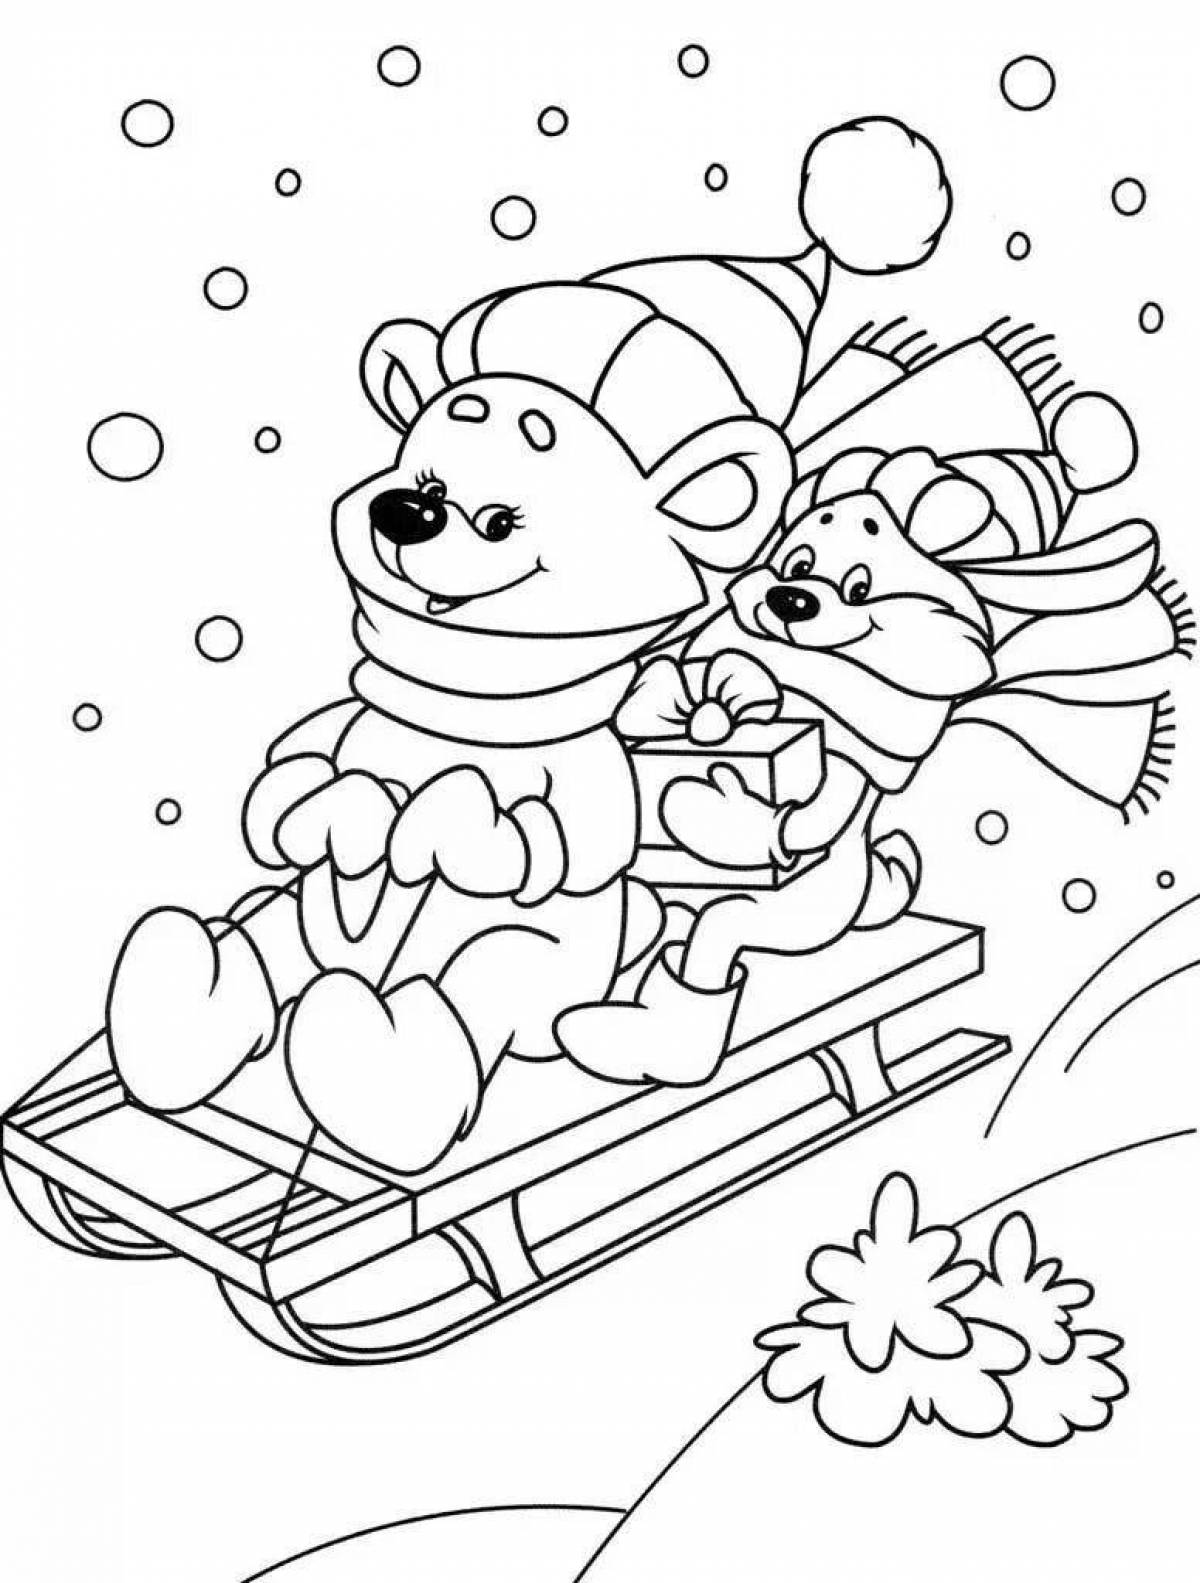 Awesome winter coloring pages for kids